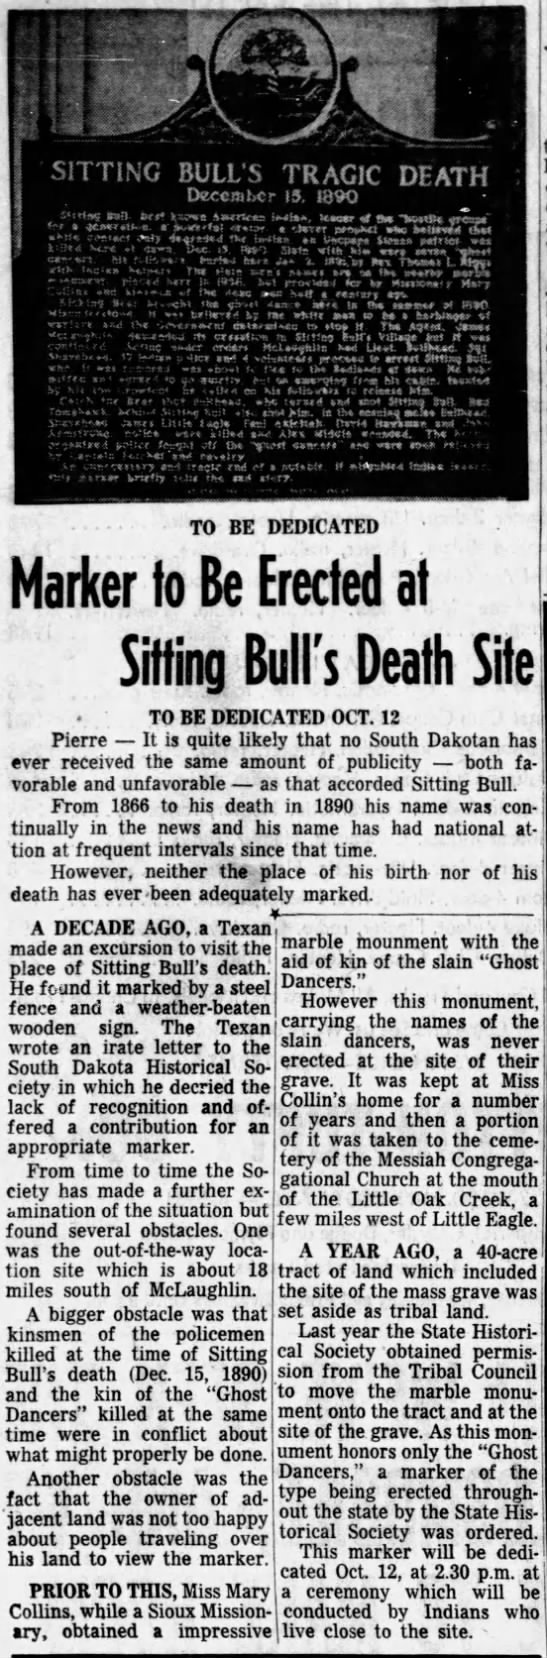 Marker to be erected at Sitting Bull's death site in 1958 - 